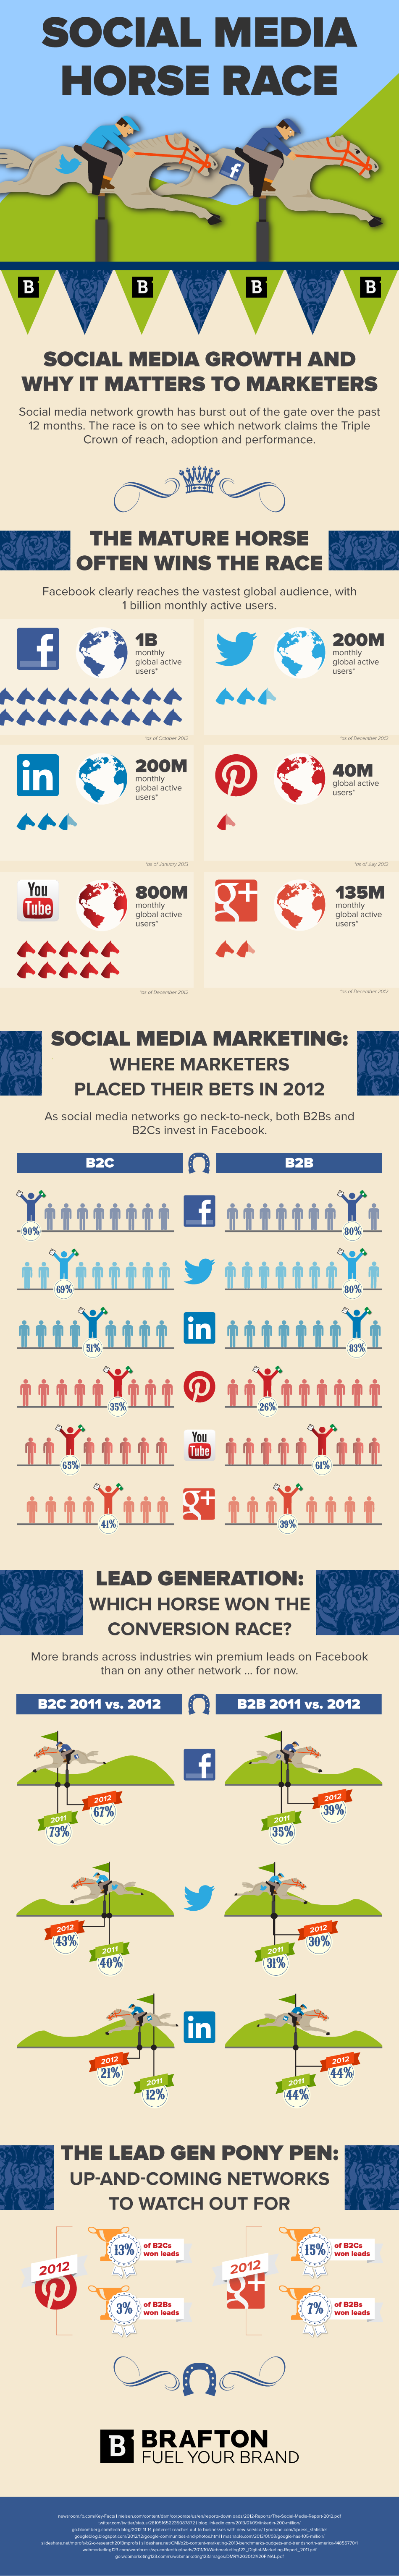 Social media marketing will continue to evolve in 2013, and this infographic shows which networks stand a better chance of reaching and engaging prospects.